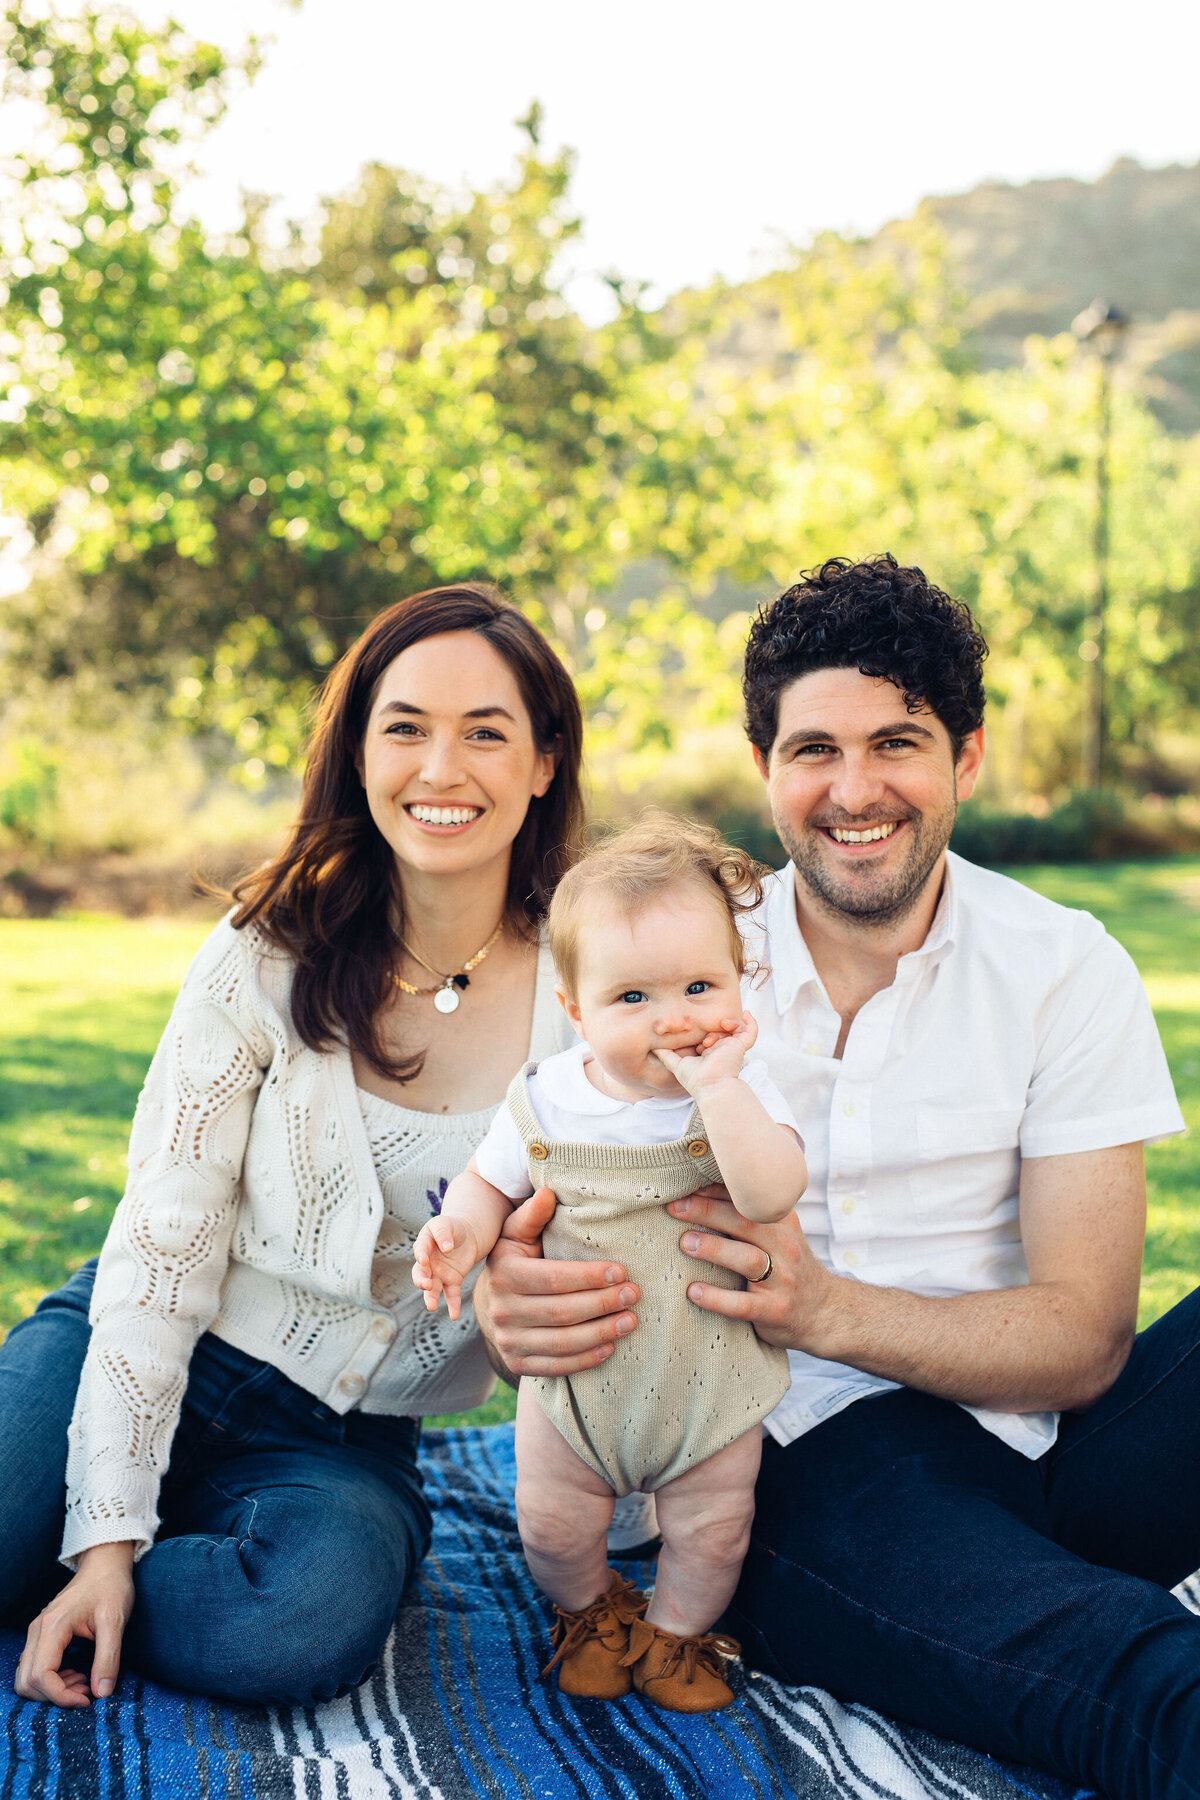 Family Portrait Photo Of Couple Holding Their Baby While Sitting On a Blue Fabric On The Ground Los Angeles